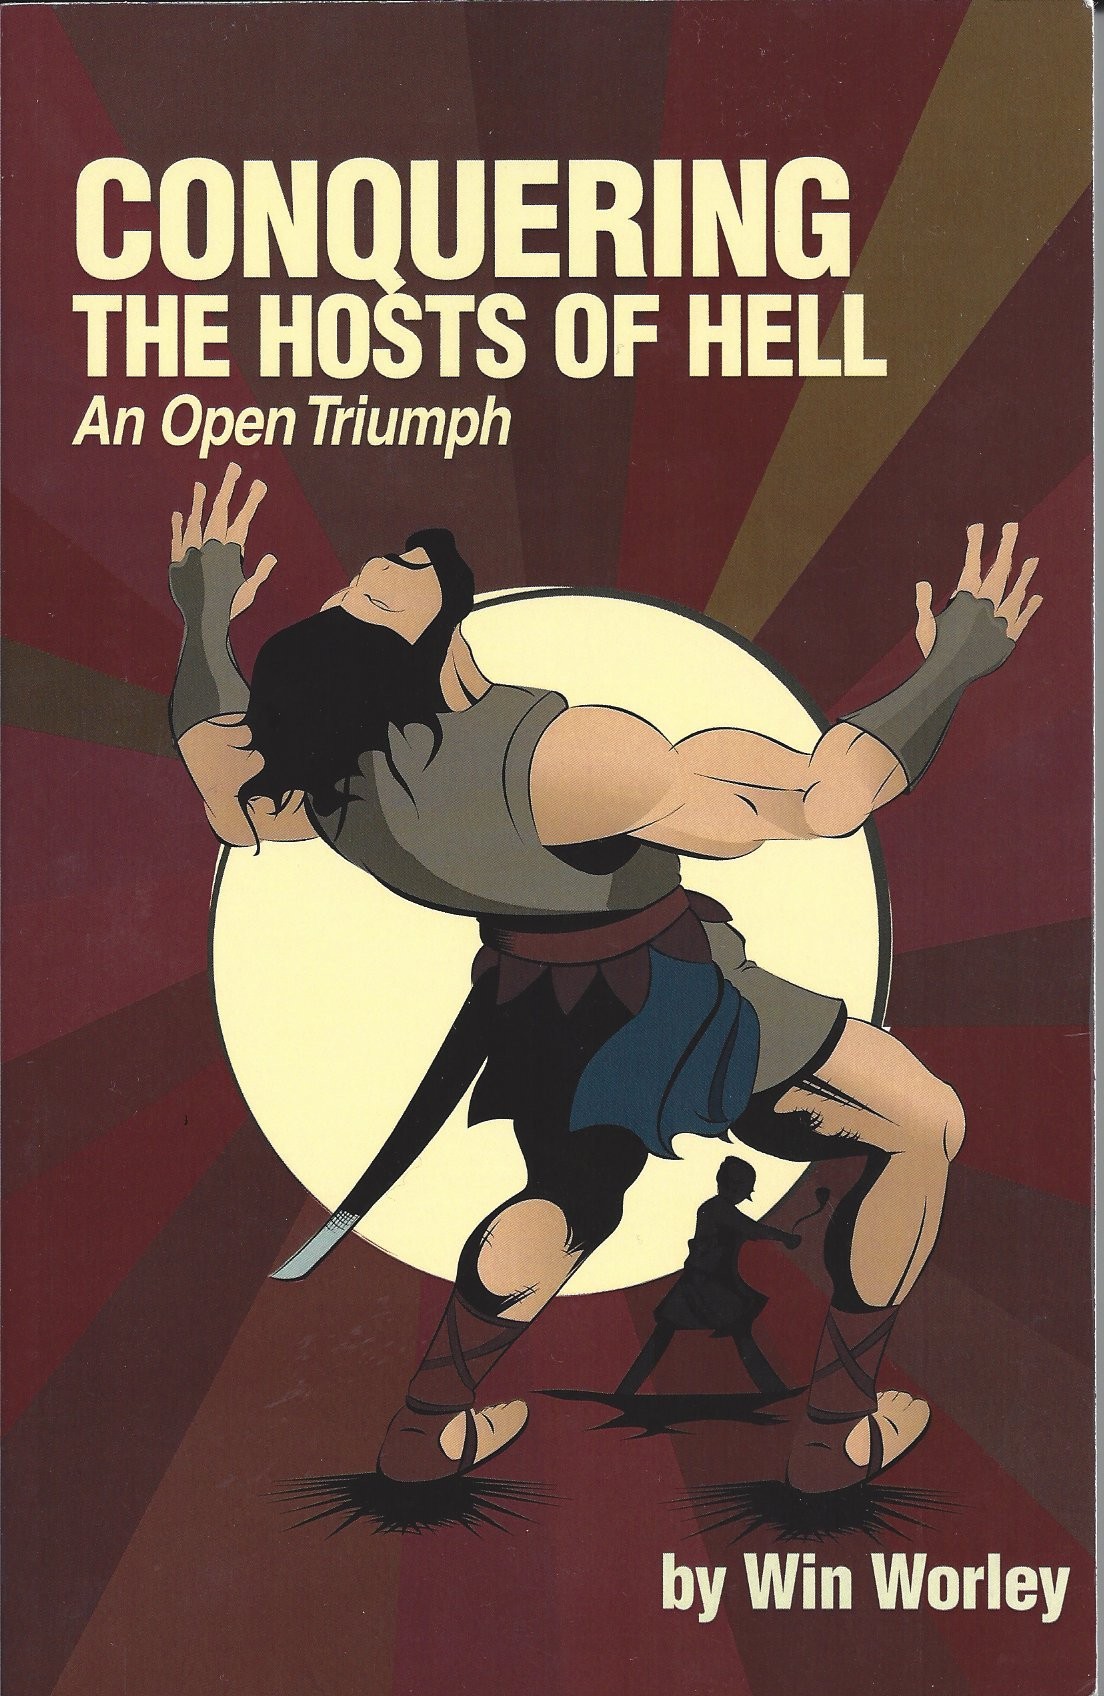 Conquering the Hosts of Hell – An Open Triumph